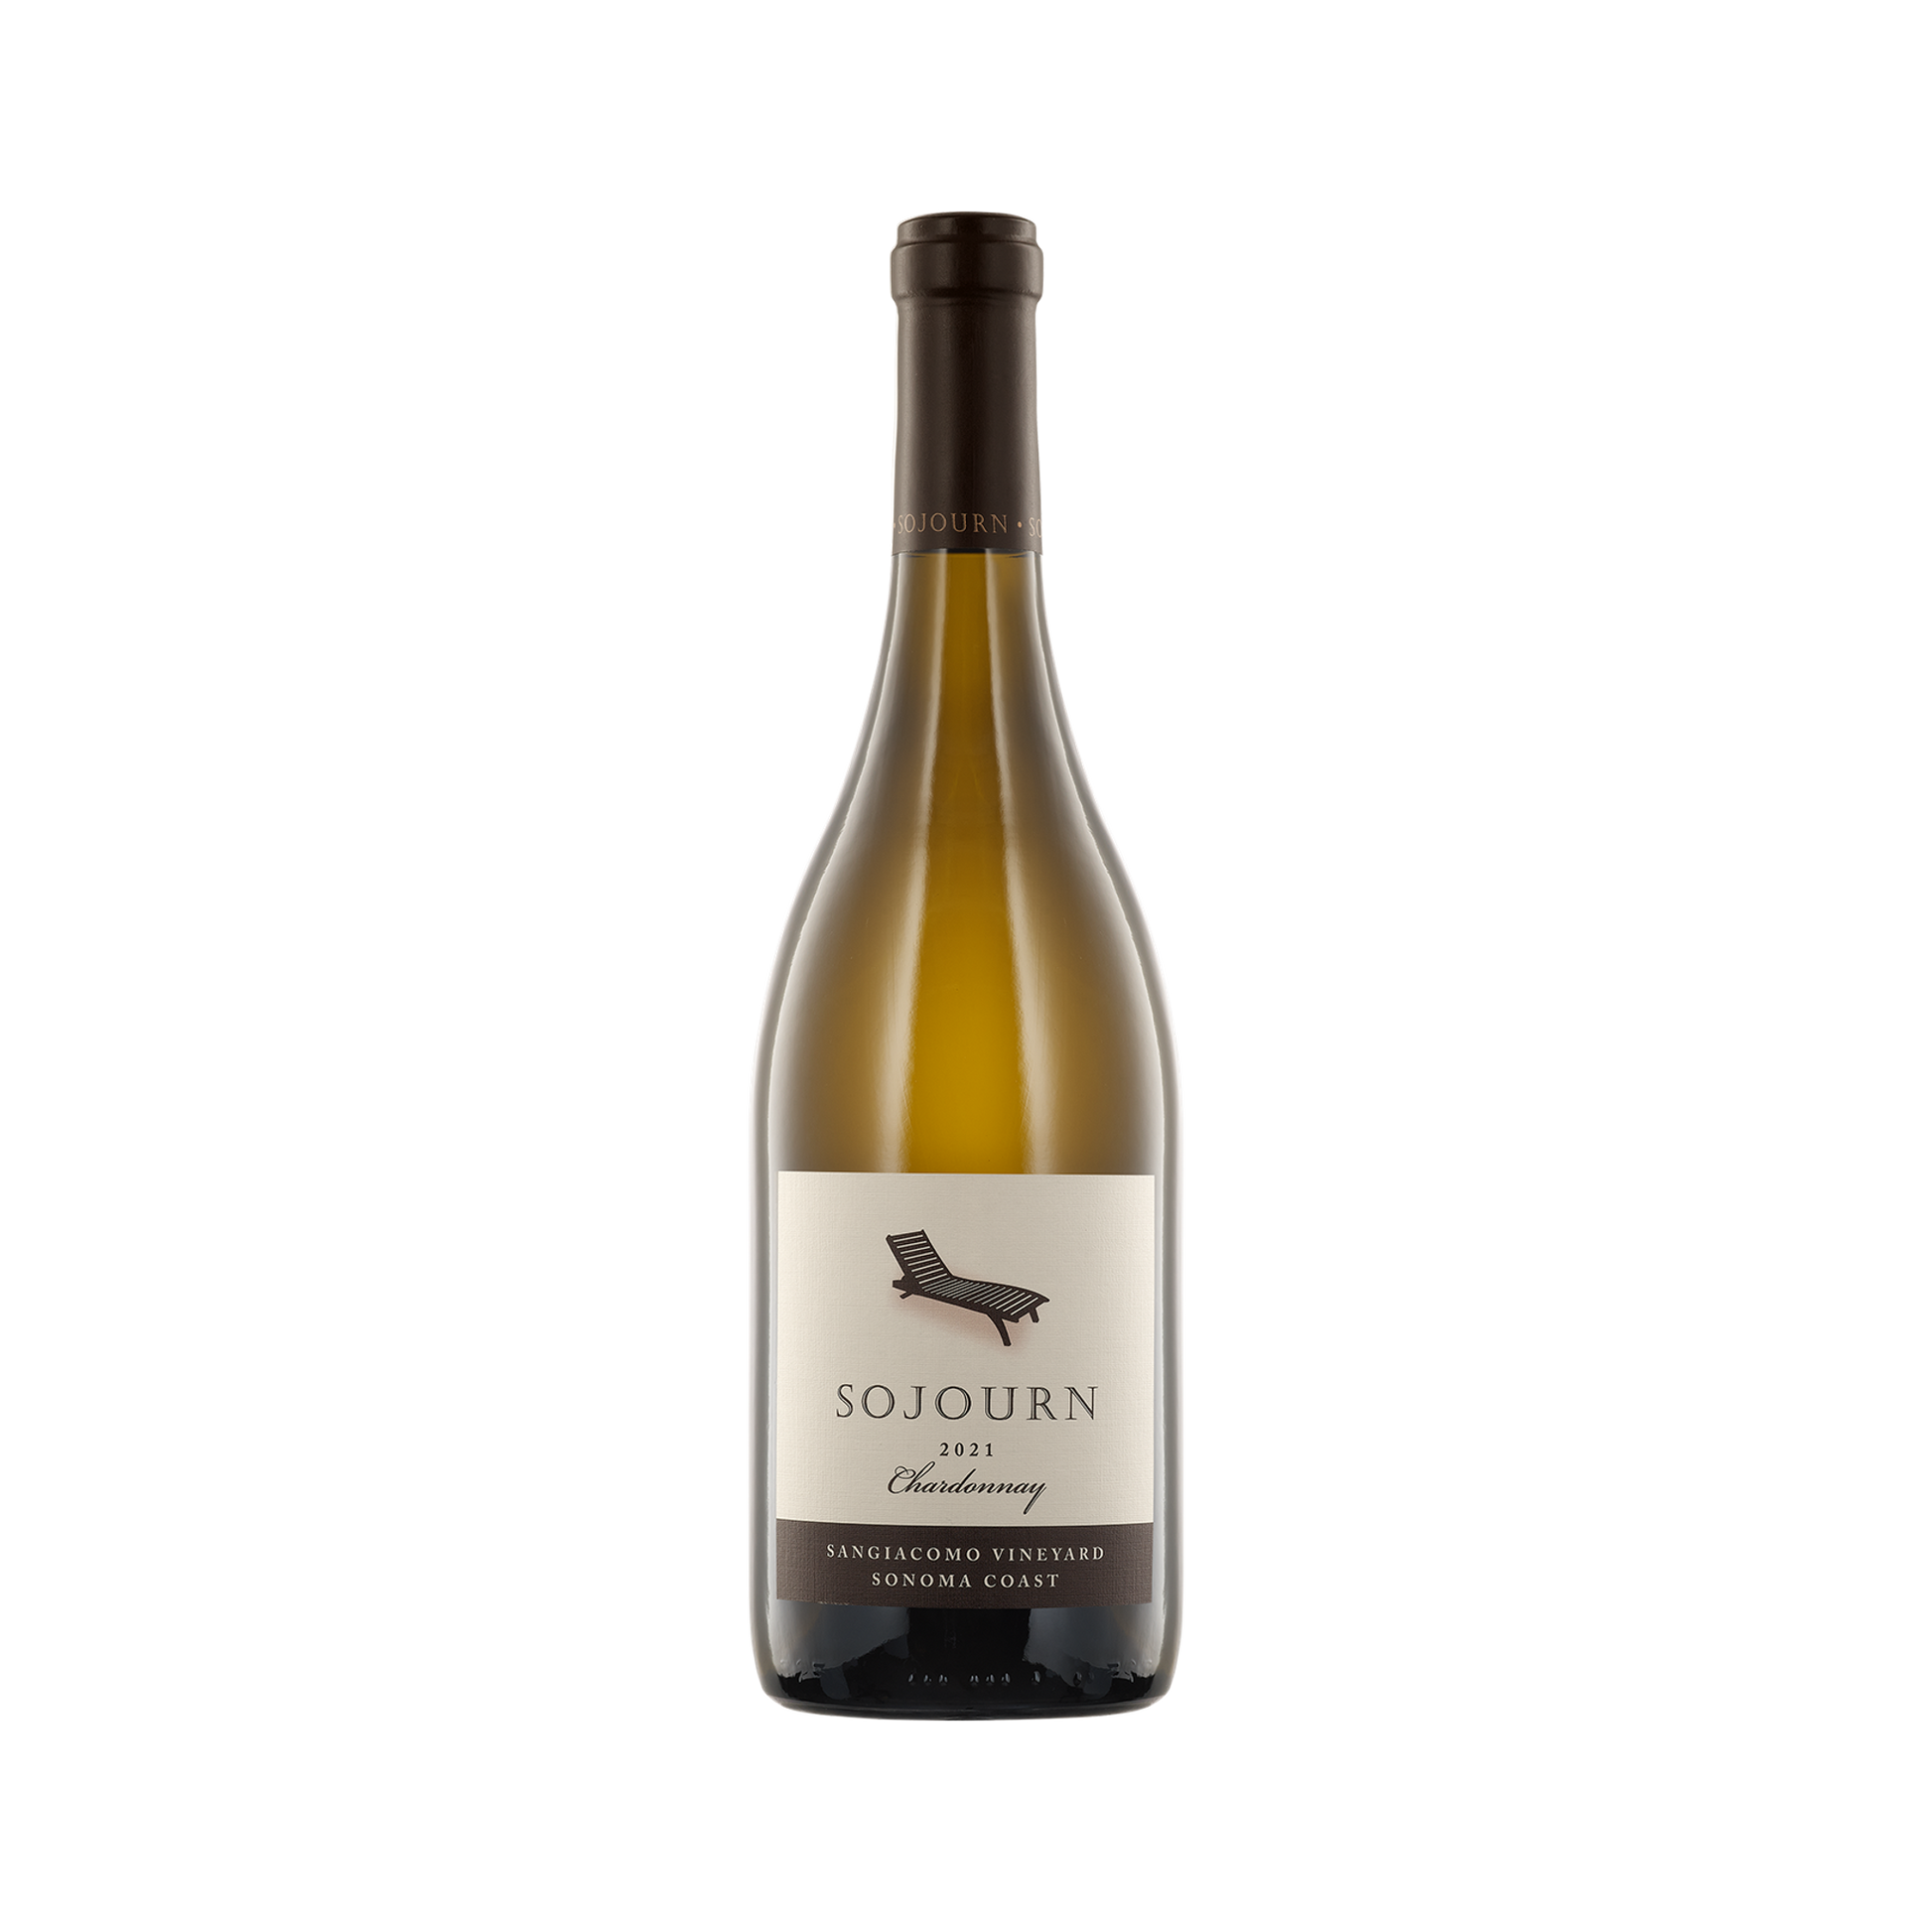 A bottle of Sojourn 2021 Chardonnay